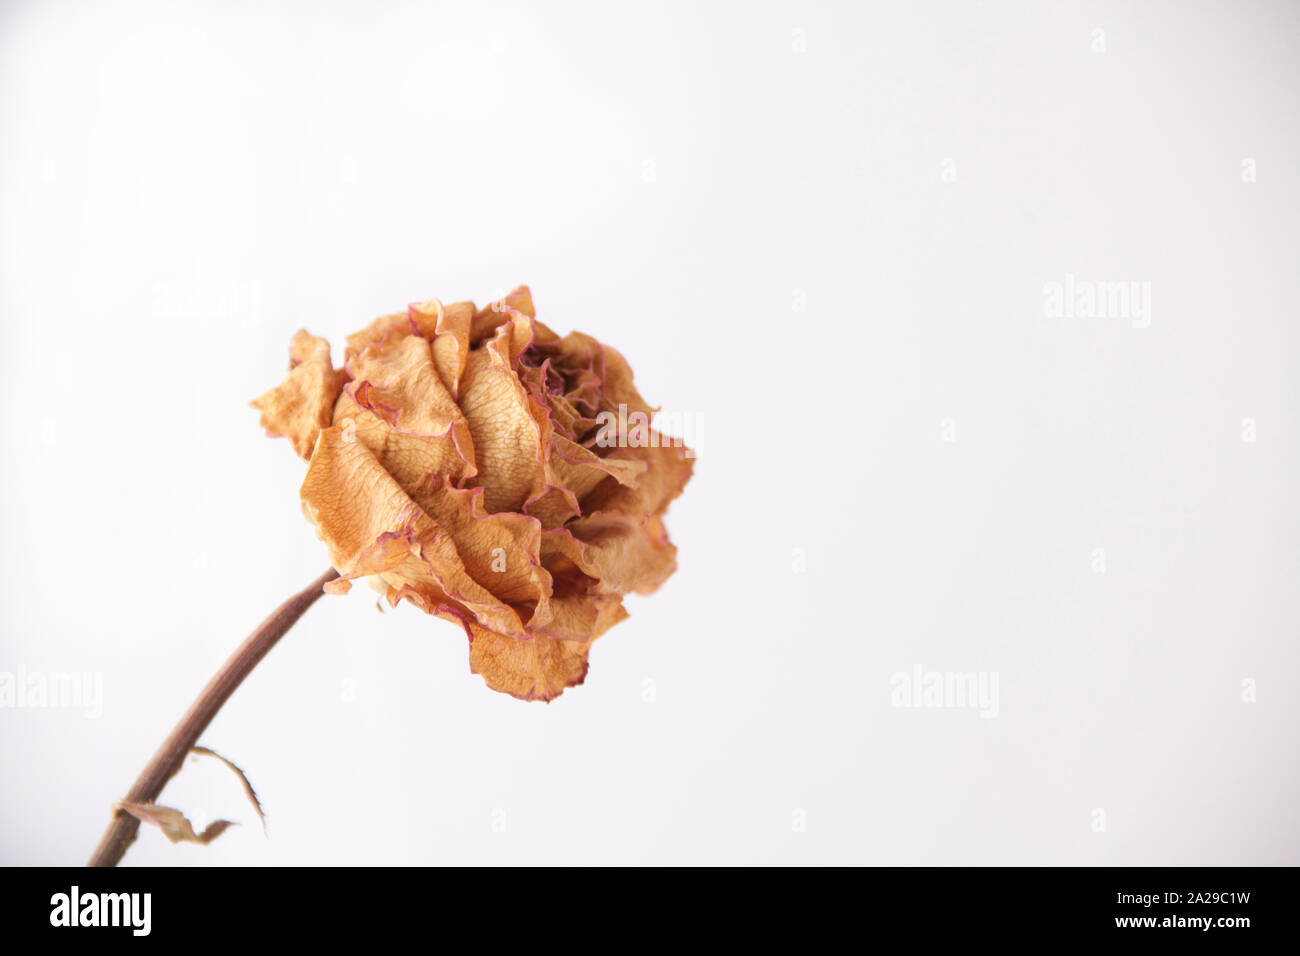 A single dried yellow rose. Stock Photo